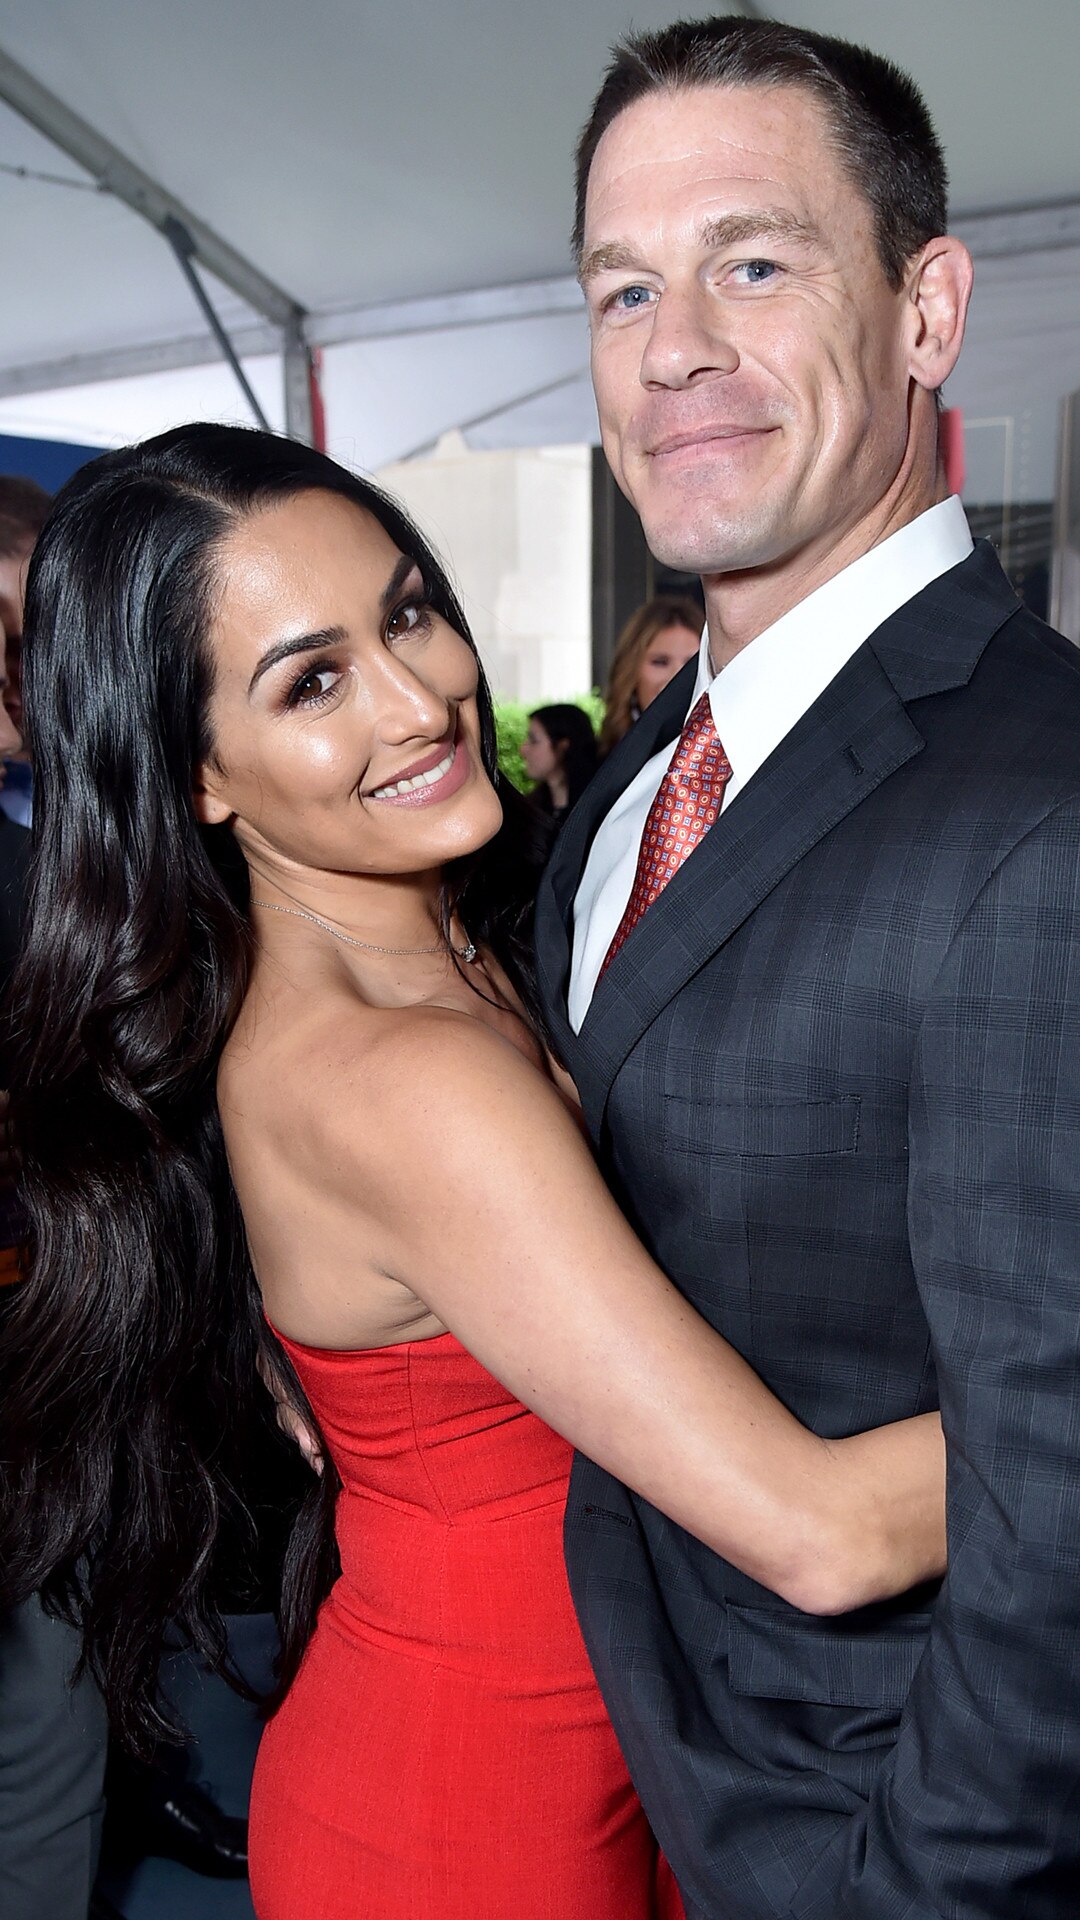 John Cena Says He Wants Kids With Nikki Bella 1 Month After Split picture photo pic